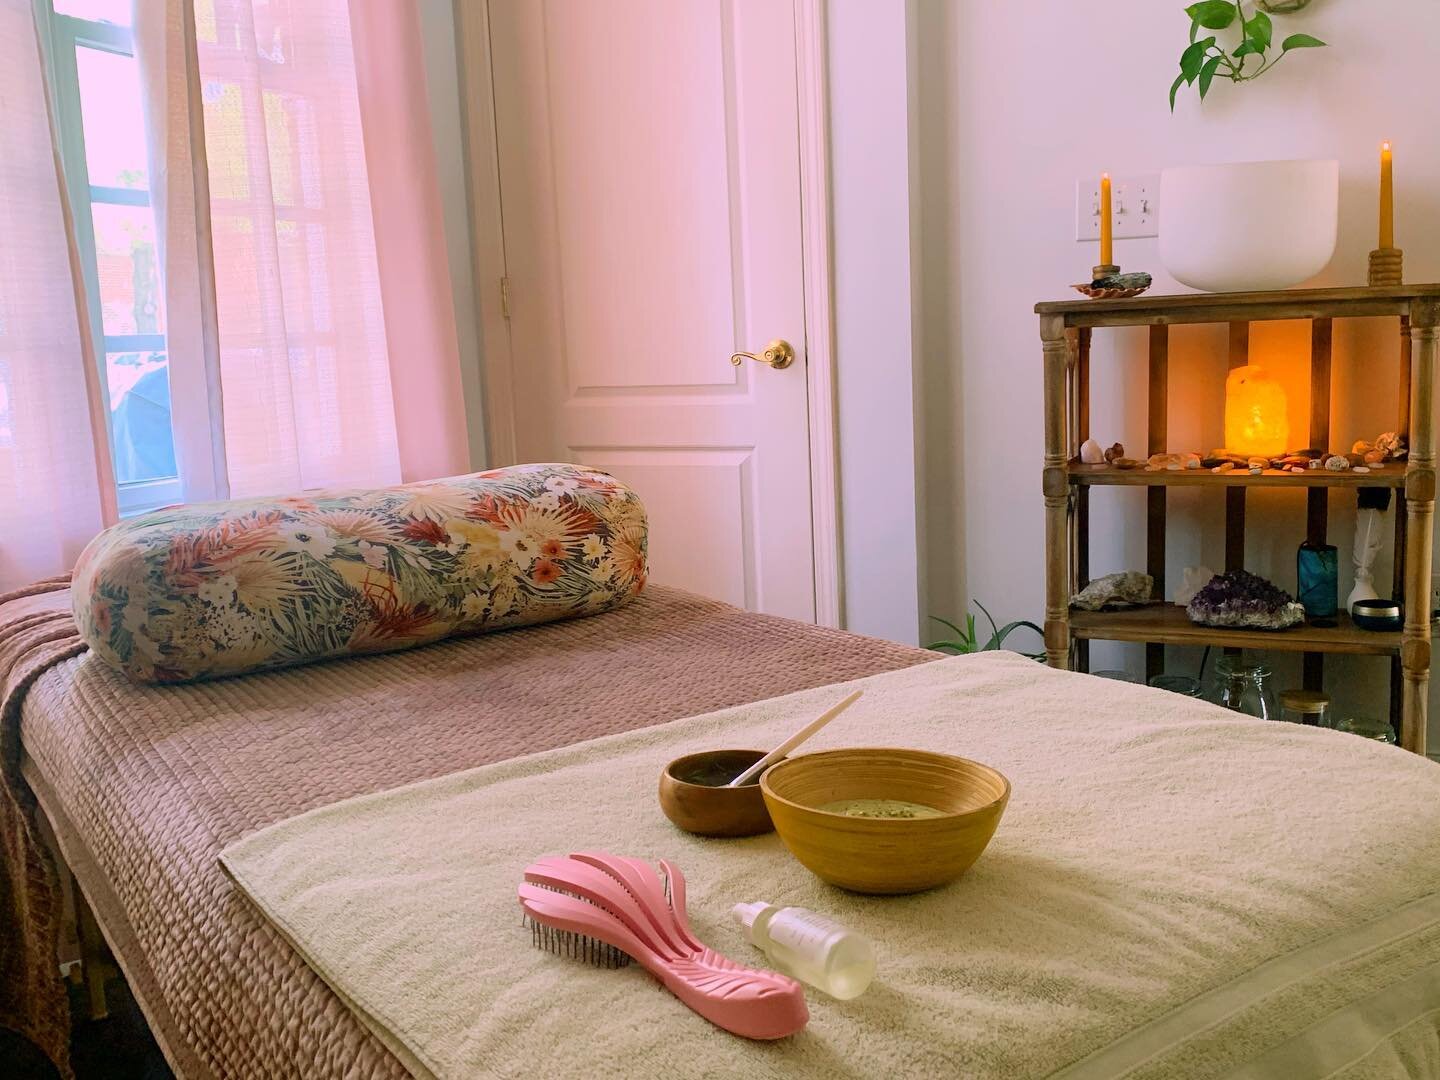 Spa Rituals are grounding, rejuvenating, and completely relaxing..🌝✨

Custom treatments are blended and mixed with fresh, natural, healing ingredients and applied in a tranquil atmosphere so you can literally replenish &amp; glow from the inside out